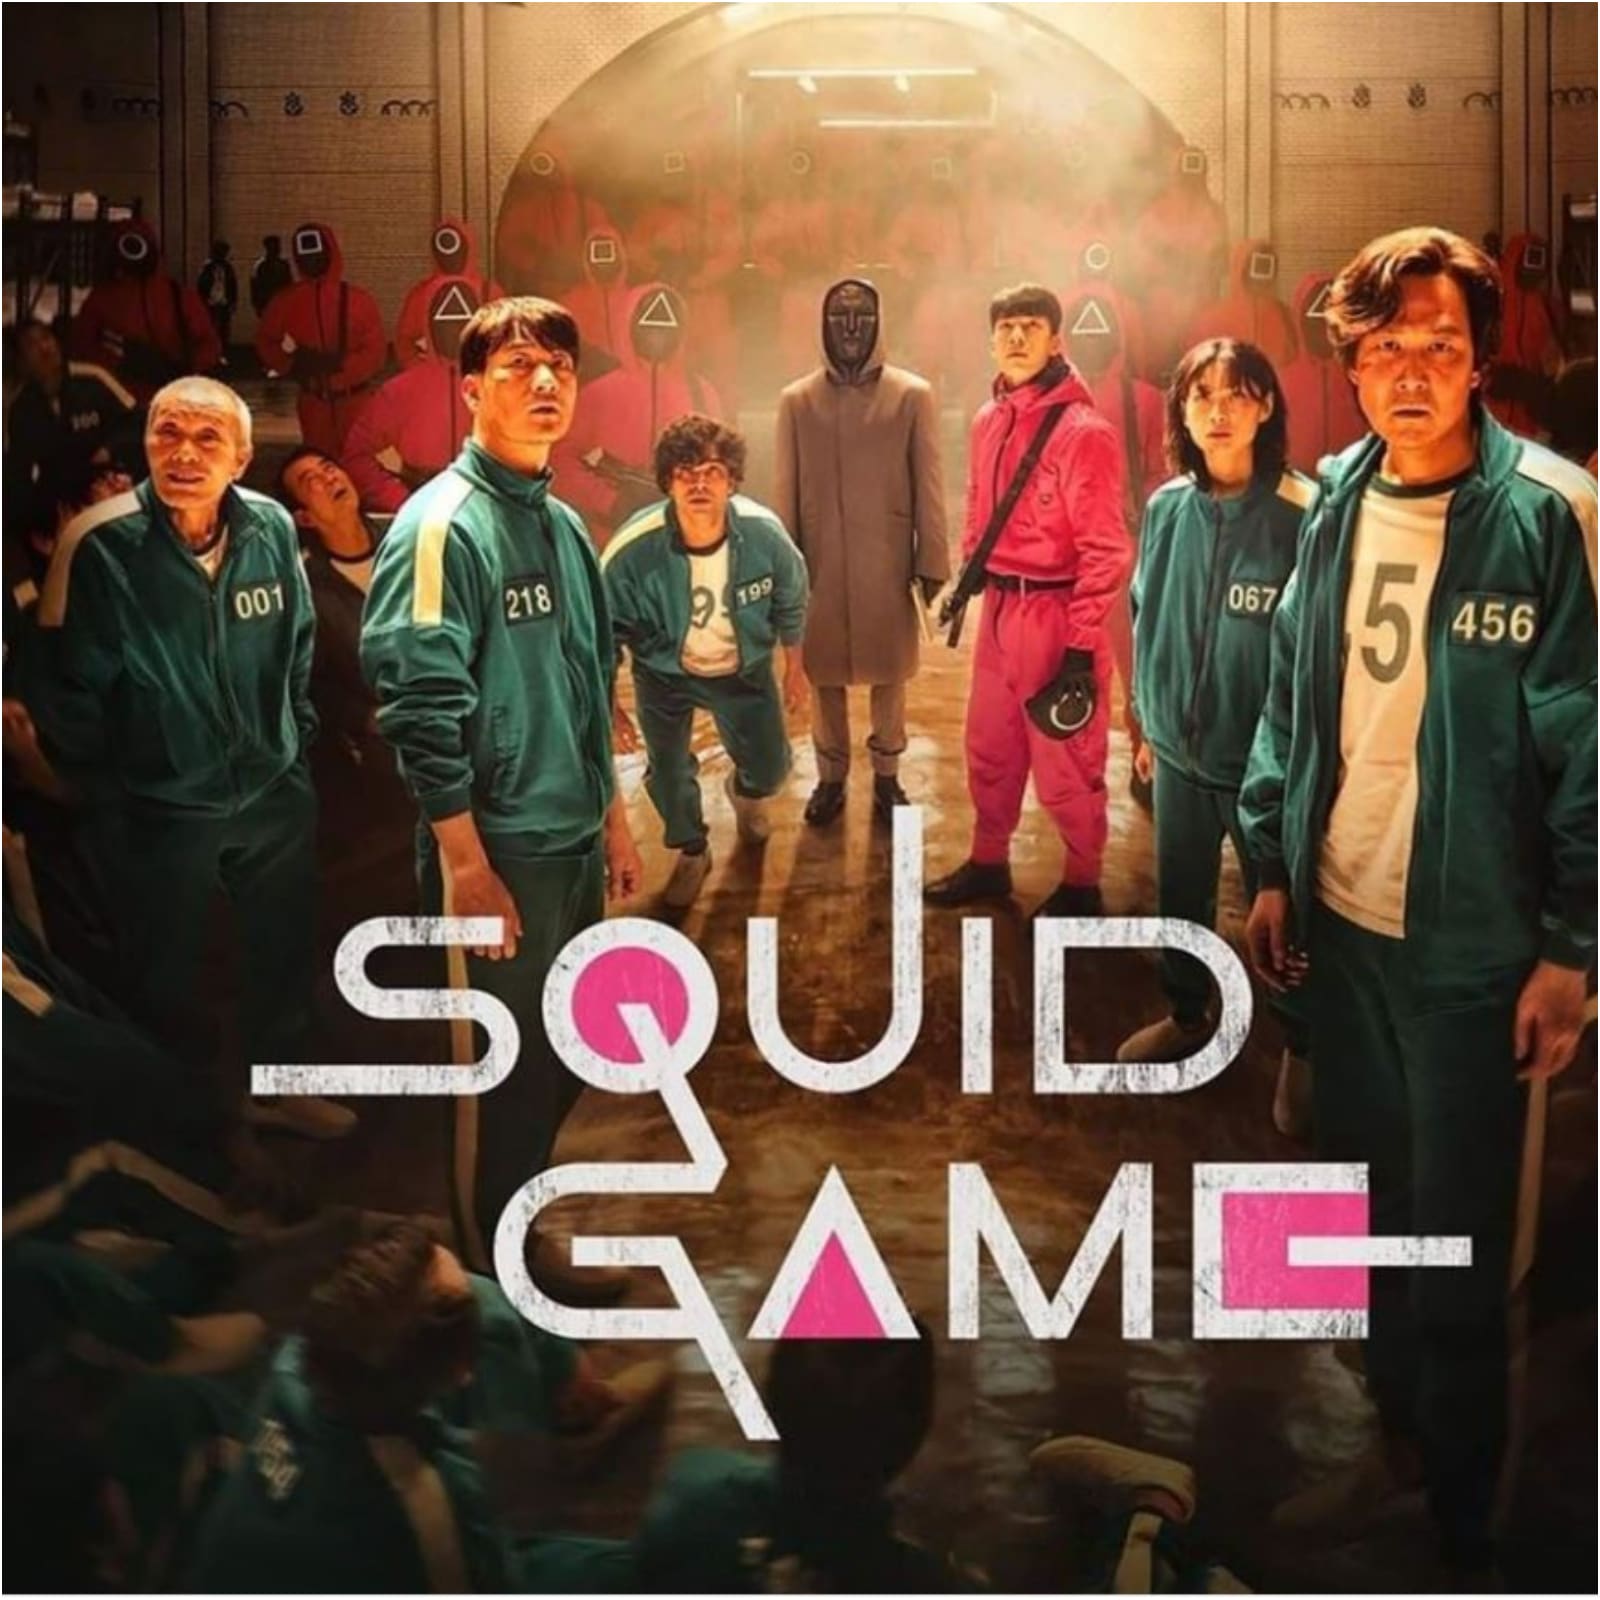 Squid Game' Draws 111M Views In First Month, Per Netflix, Besting  'Bridgerton' To Become Top All-Time Series Launch – Deadline